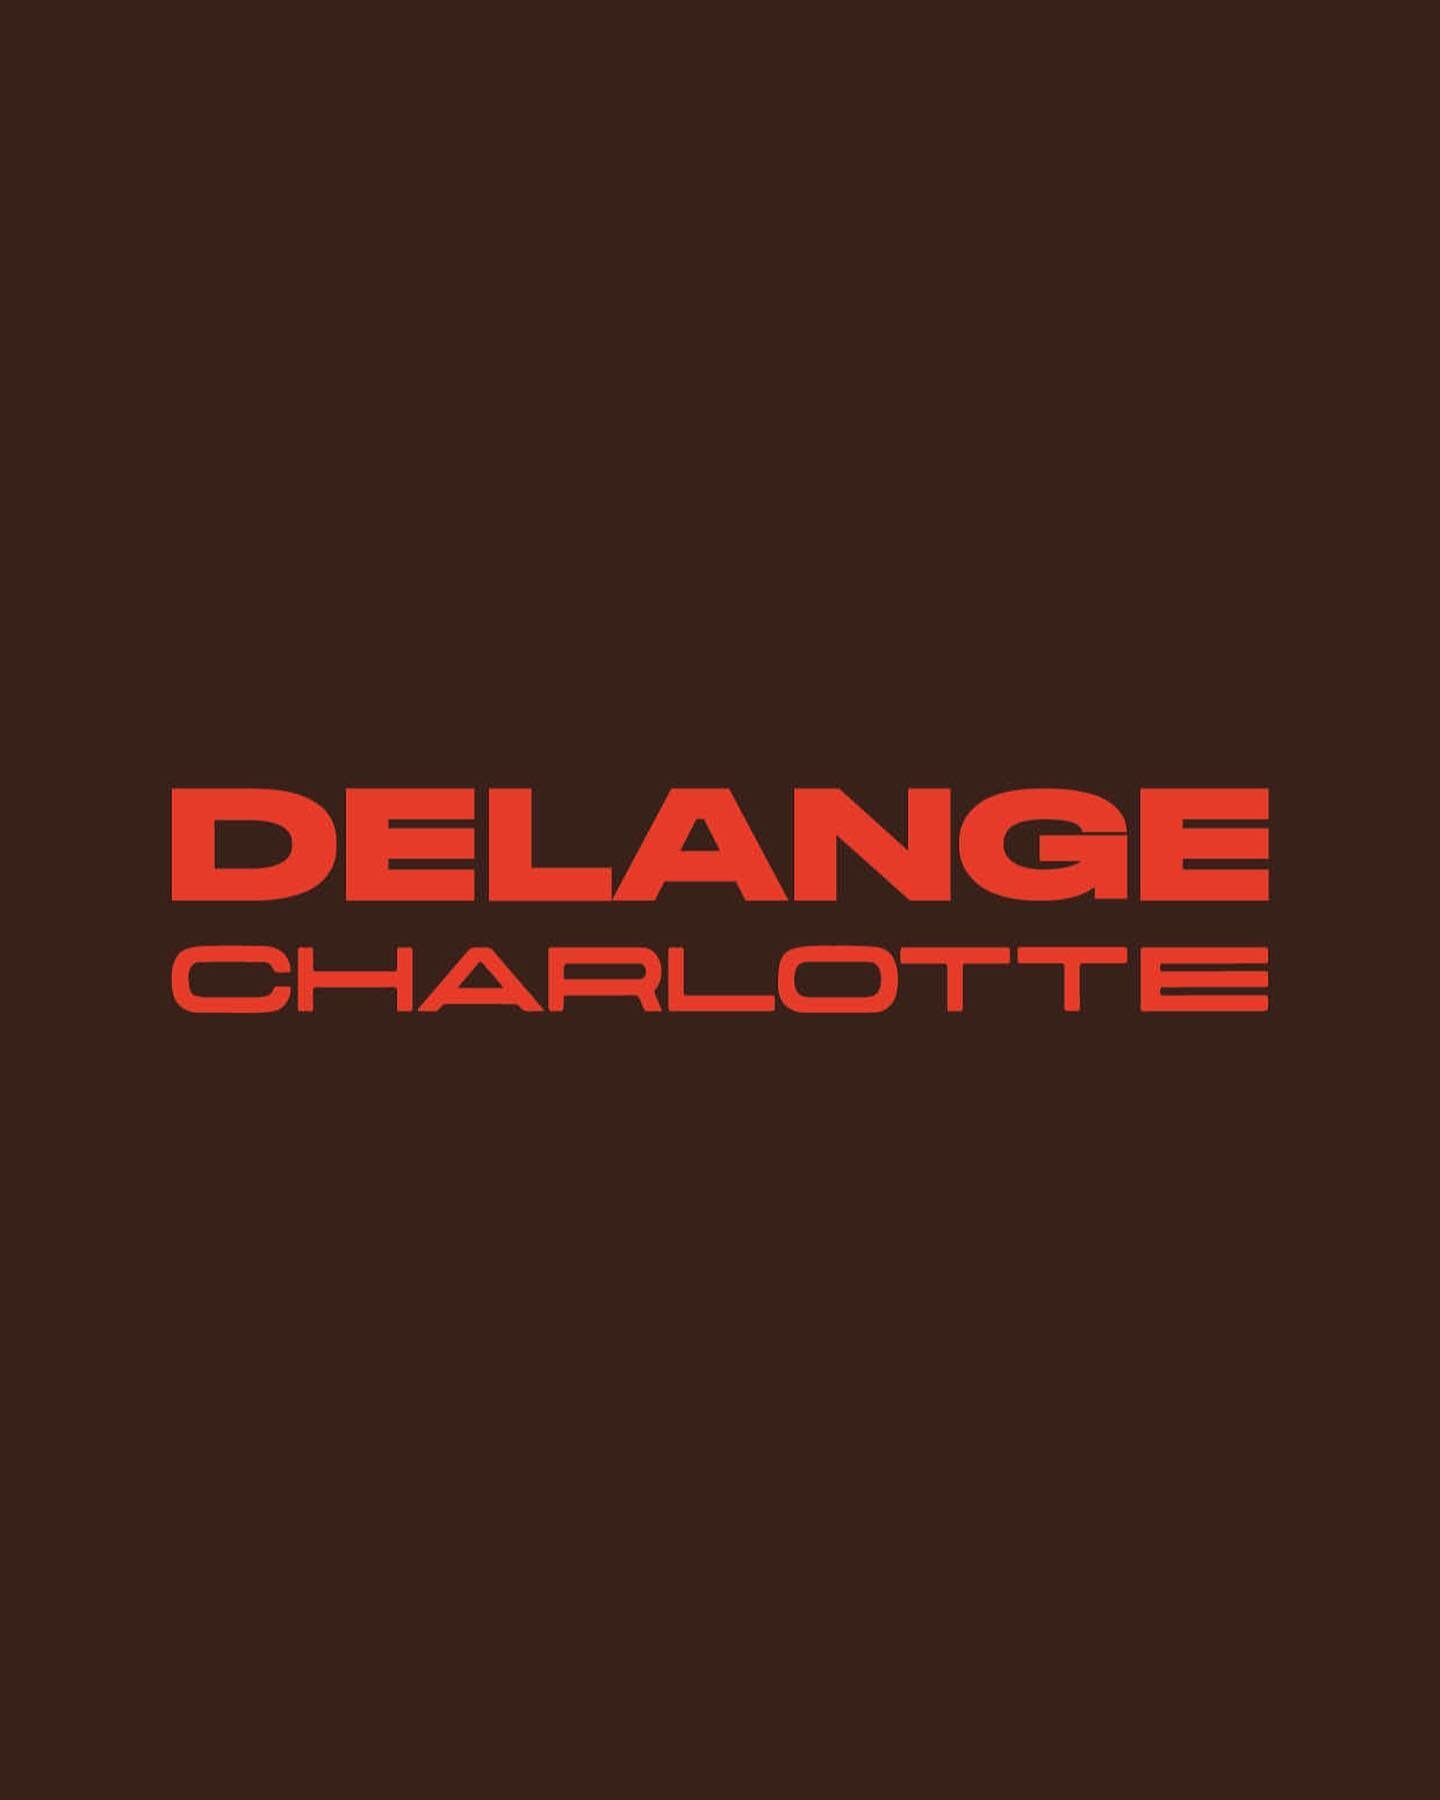 brand identity for @delangecharlotte. 
Fashion and lifestyle photographer from Antwerp.